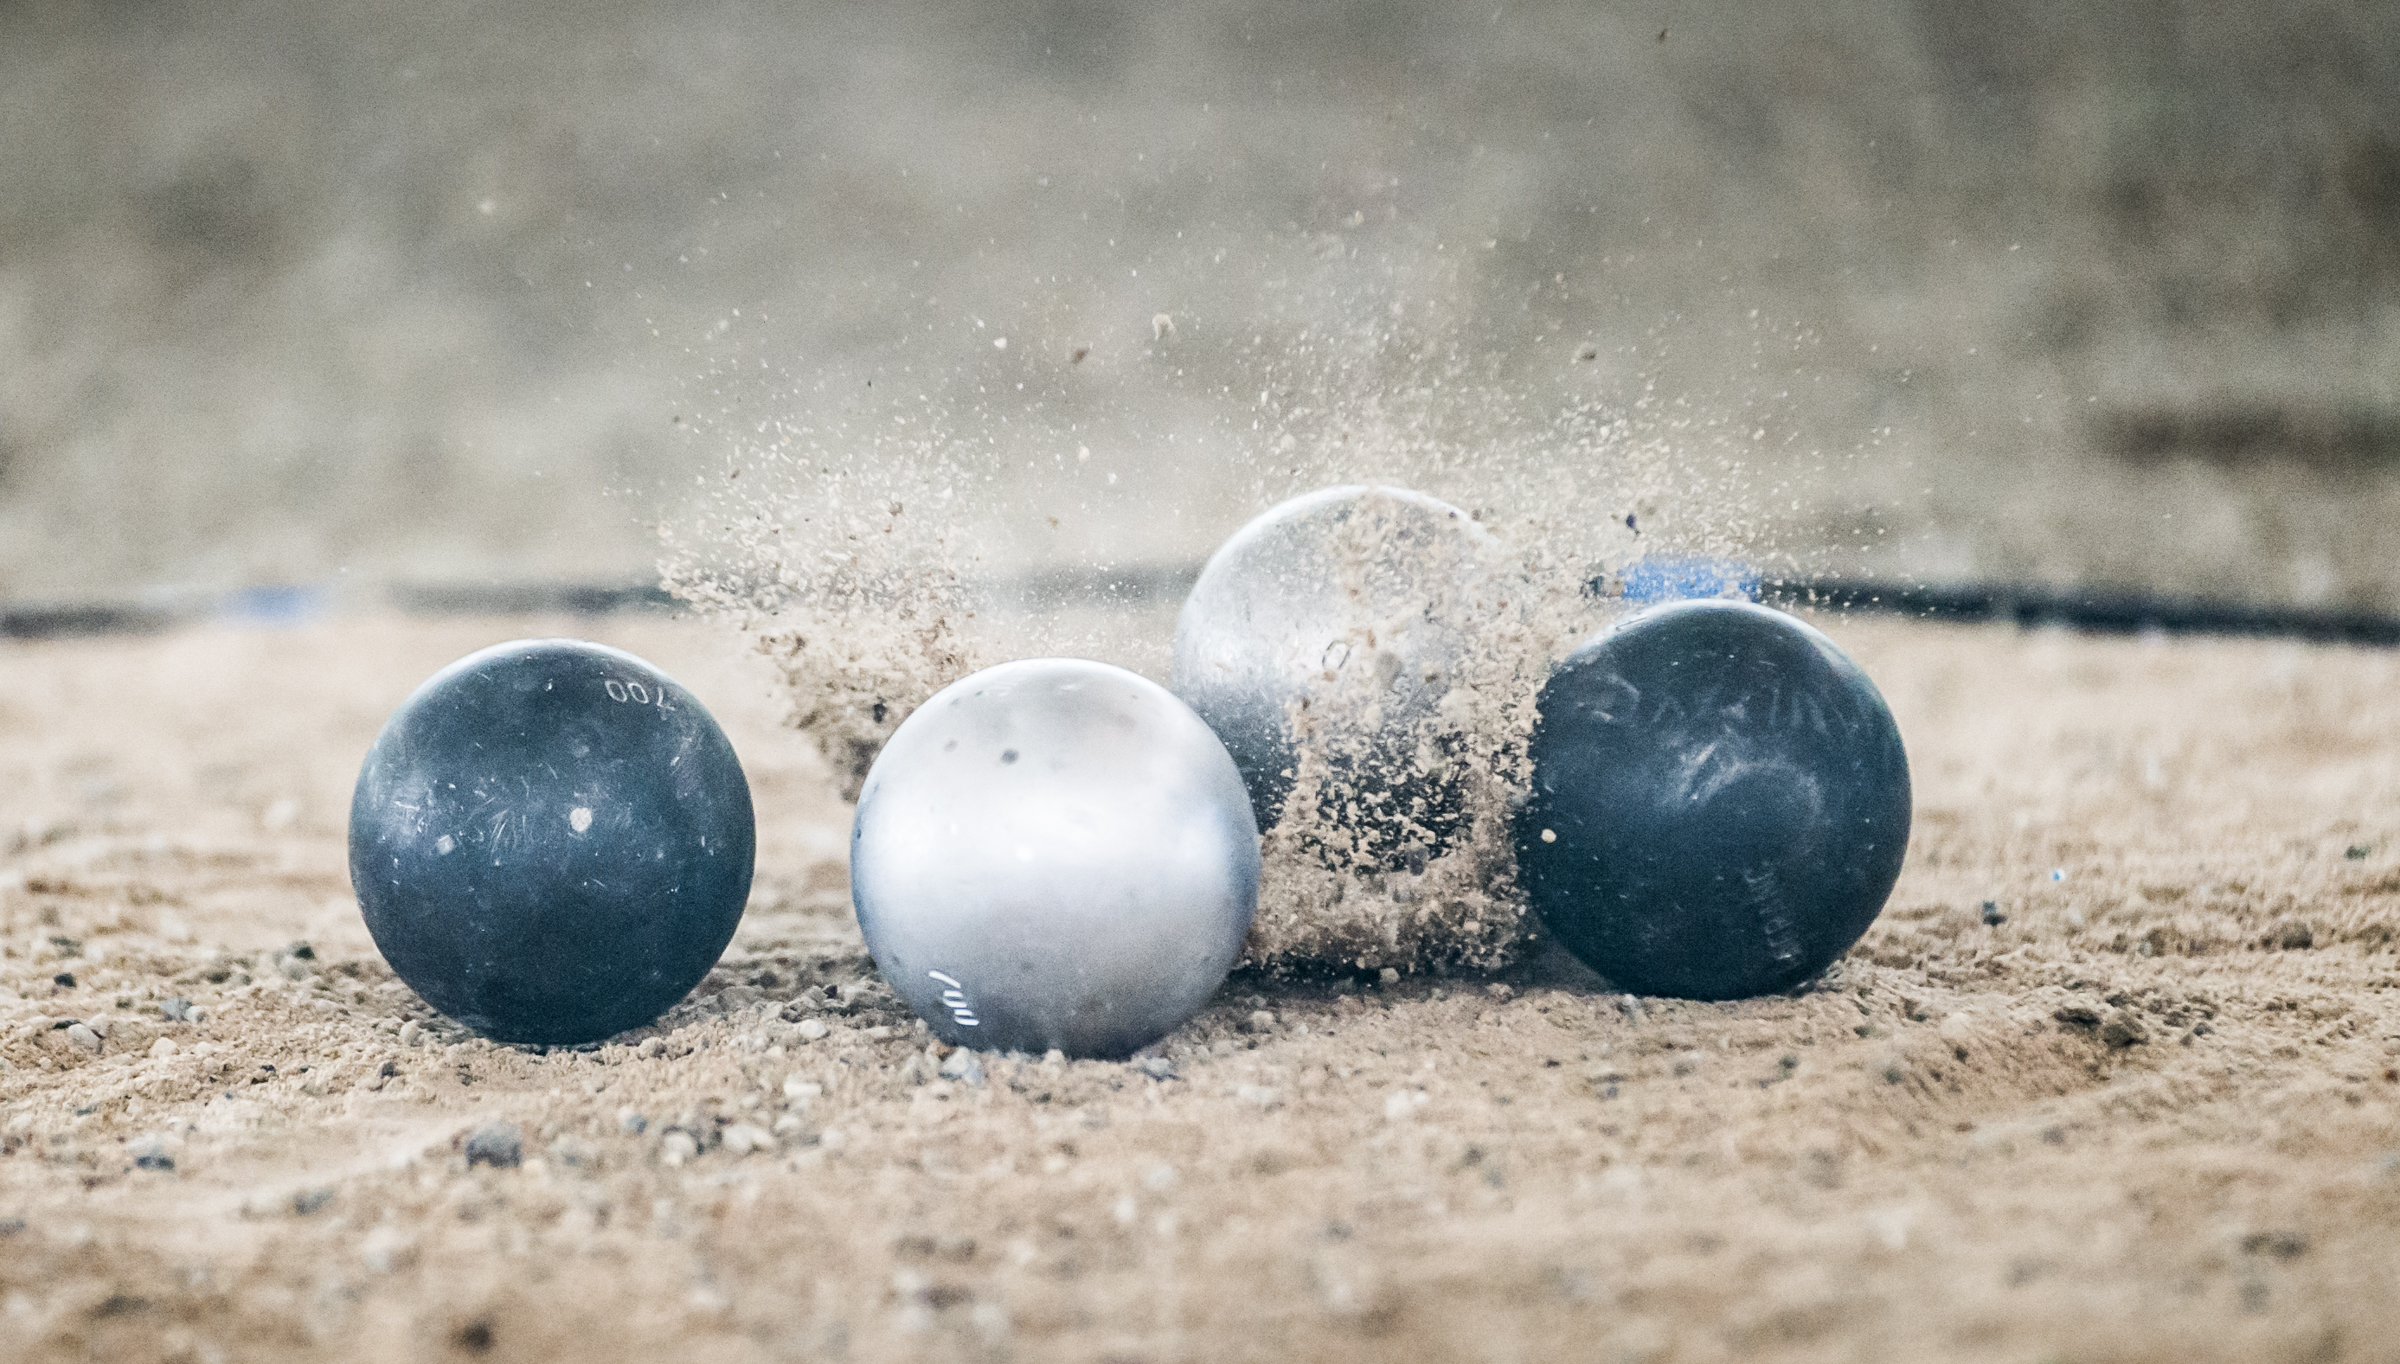 Petanque balls collide during the ASEAN University Games at the Toa Payoh Sports Complex.